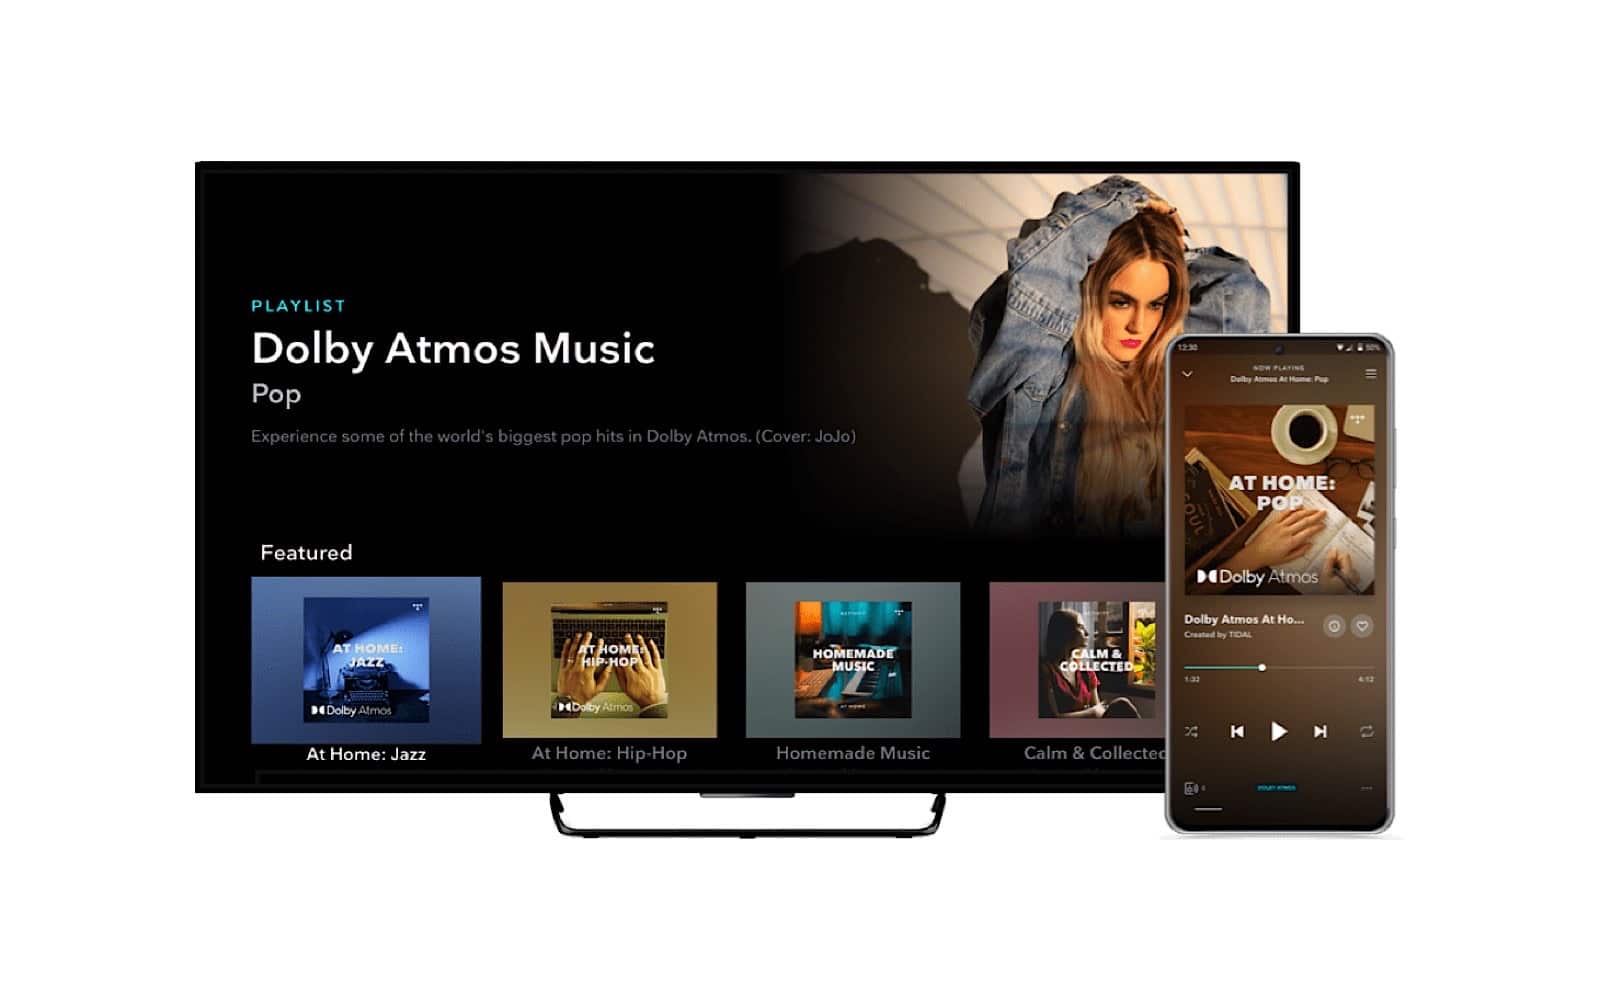 Tidal supports Dolby Atmos on TVs